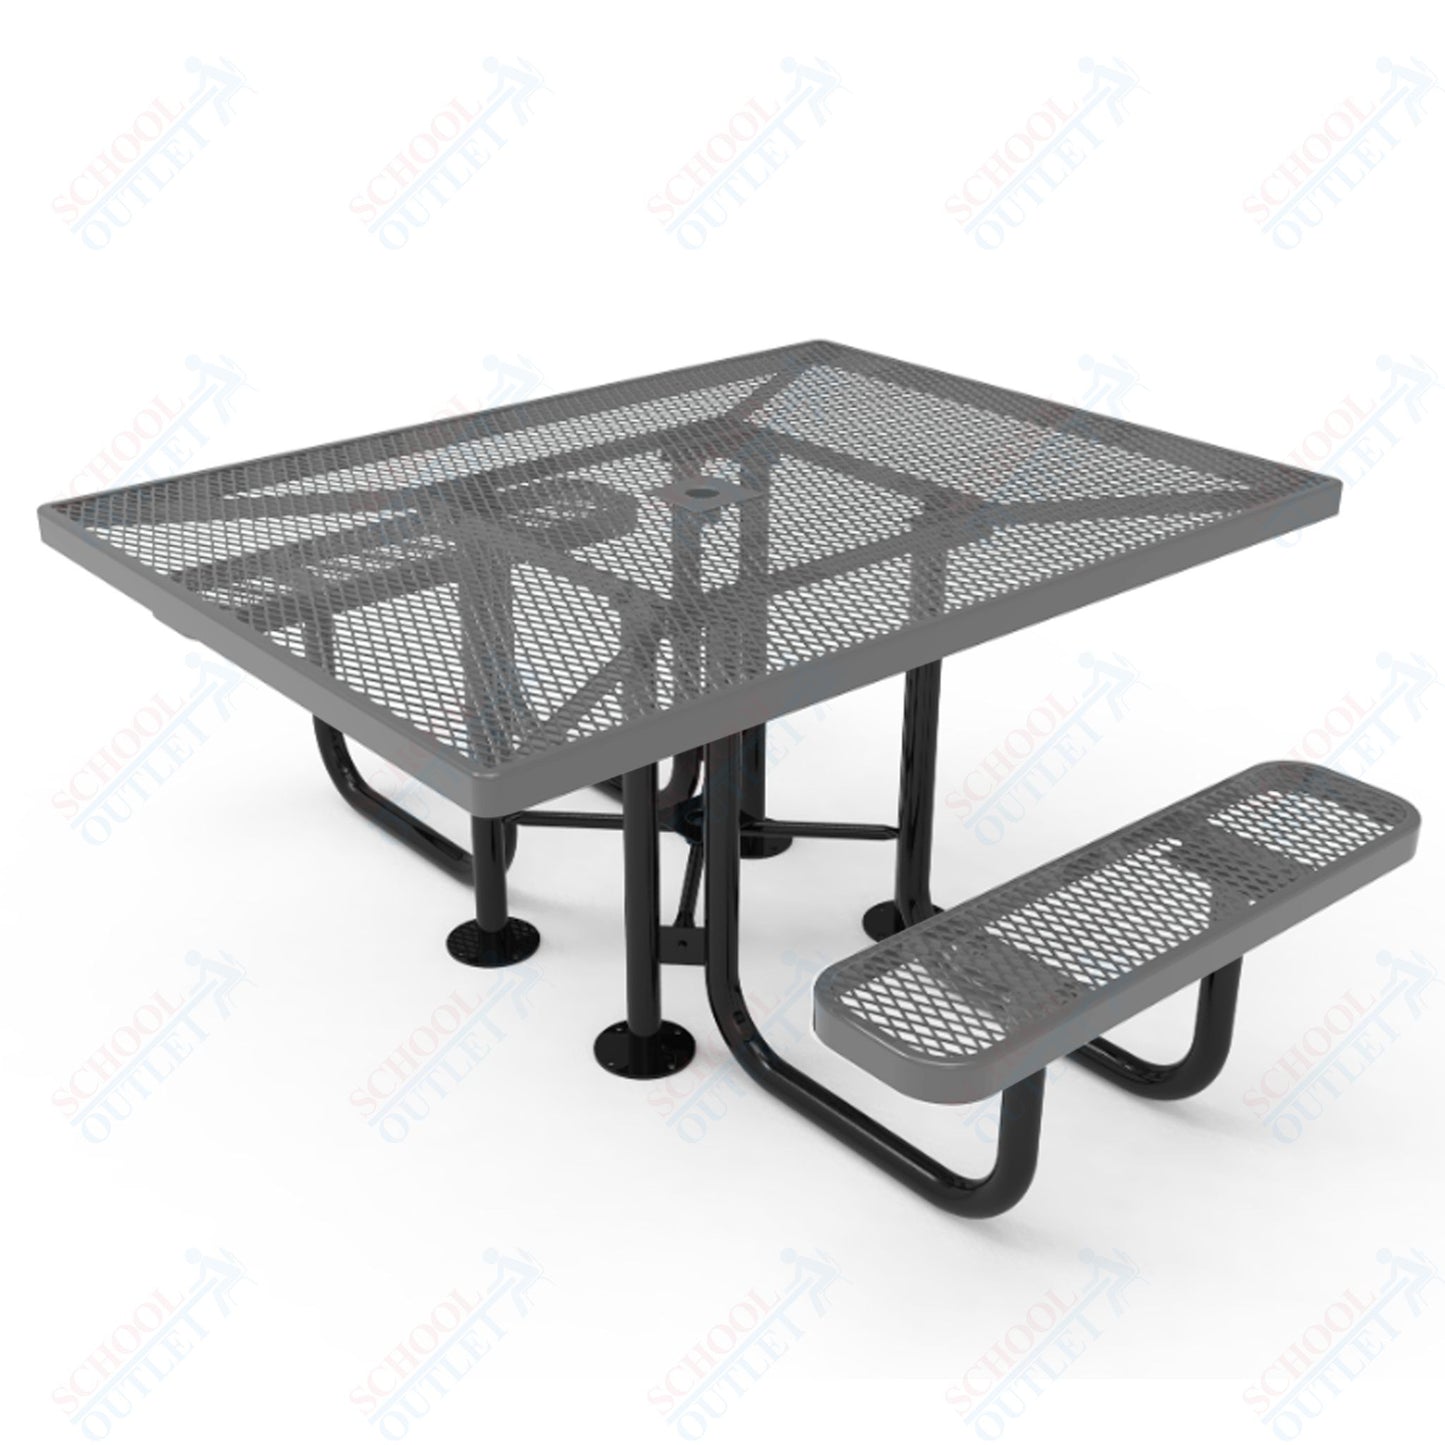 MyTcoat MYT-TSQ46-012 46″ Square Portable Picnic Table with 2 Seat and ADA Accessible (77"W x 62"D x 30"H)